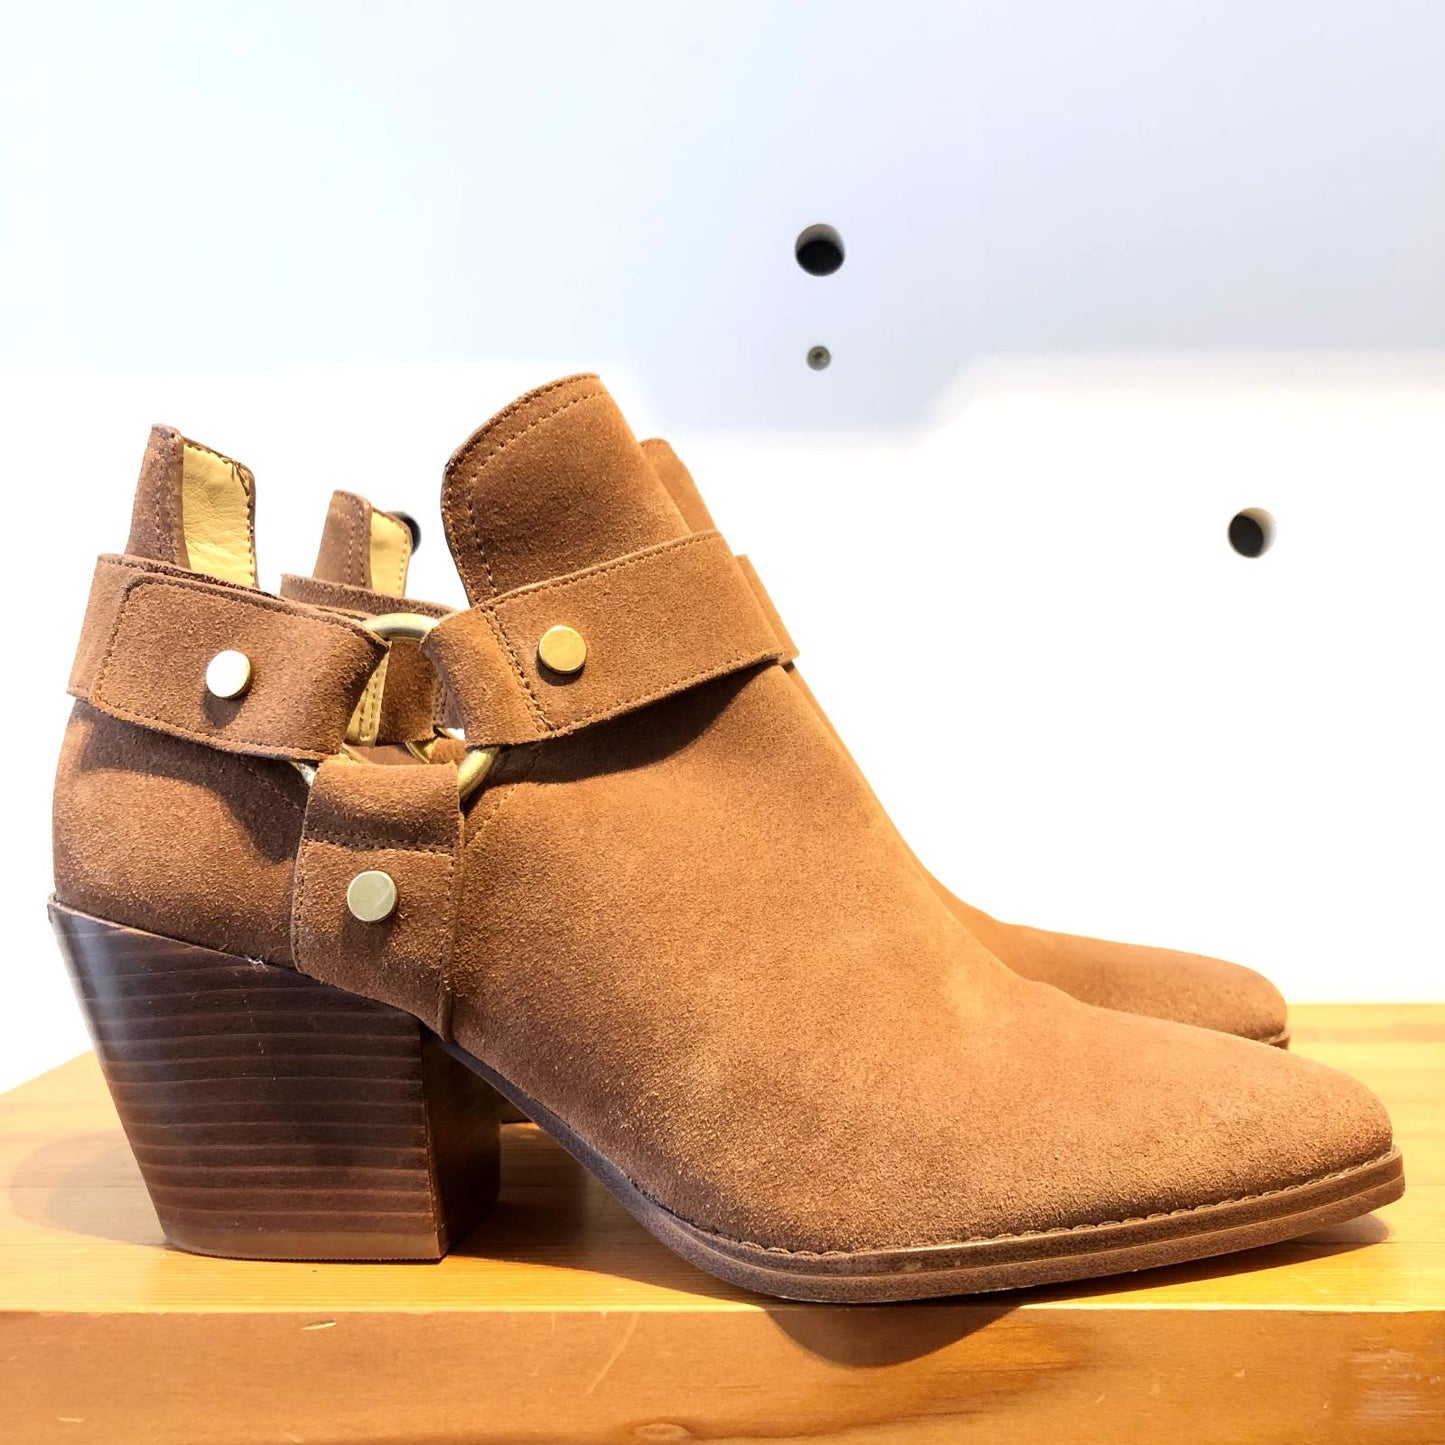 8 - Michael Kors Luggage Brown Suede Pamela Booties Boots NEW w/ Box 0222LM